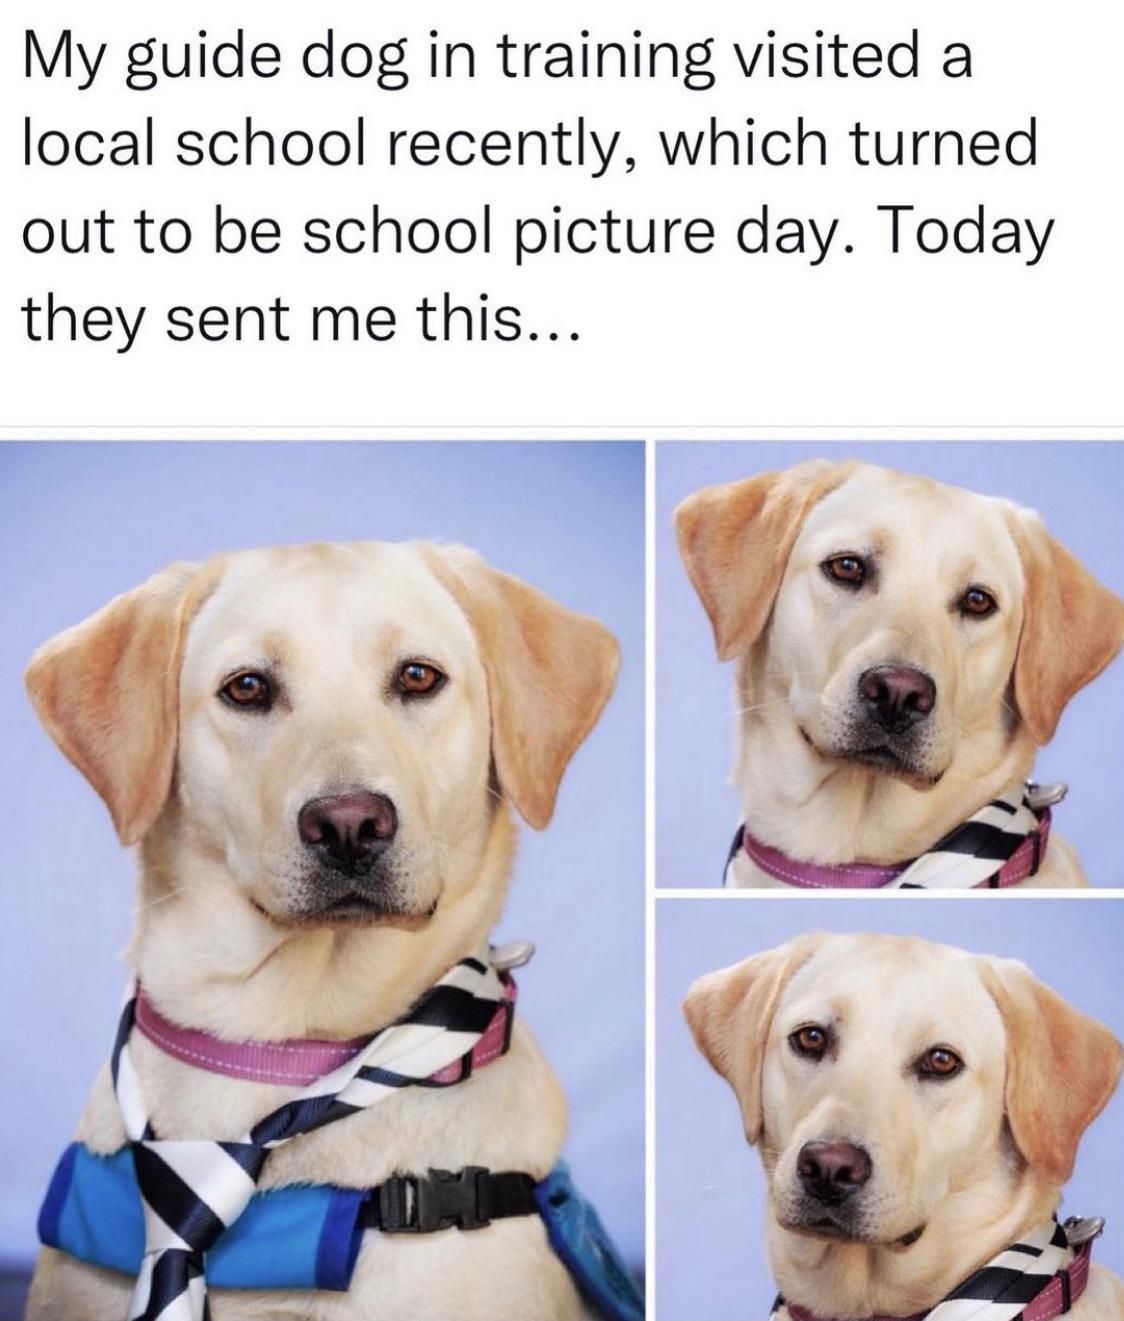 My dog got to be included in school picture day!